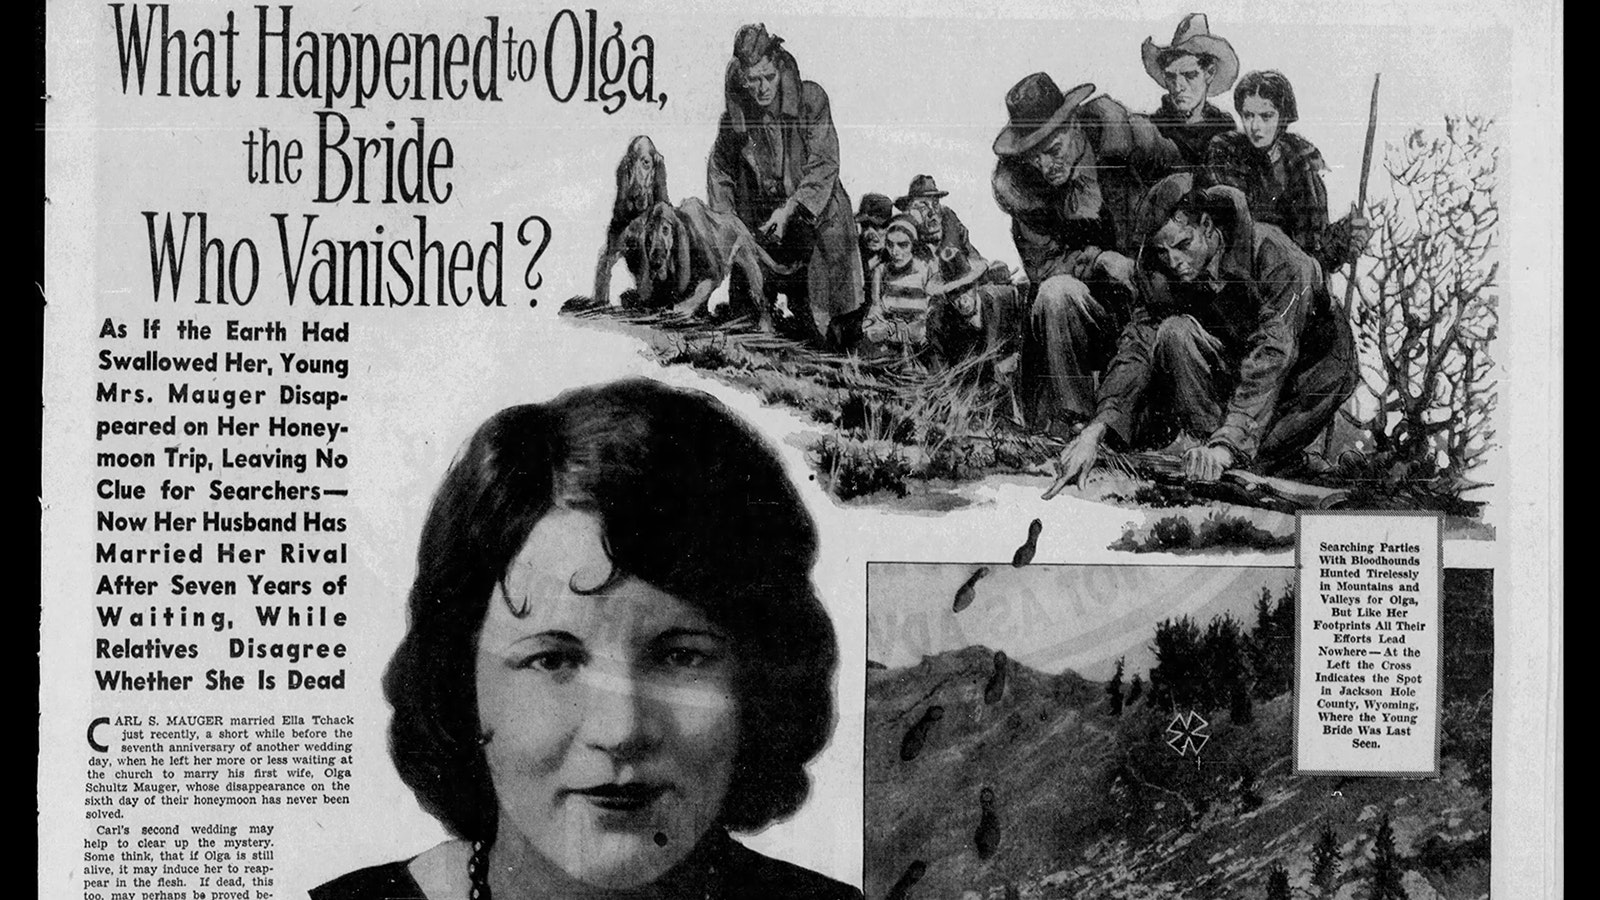 It's been nearly 90 years since Olga Mauger disappeared while on a Wyoming hunting honeymoon. There are no more clues to what happened to her today than in 1934, making her vanishing Wyoming's oldest and coldest missing person's case